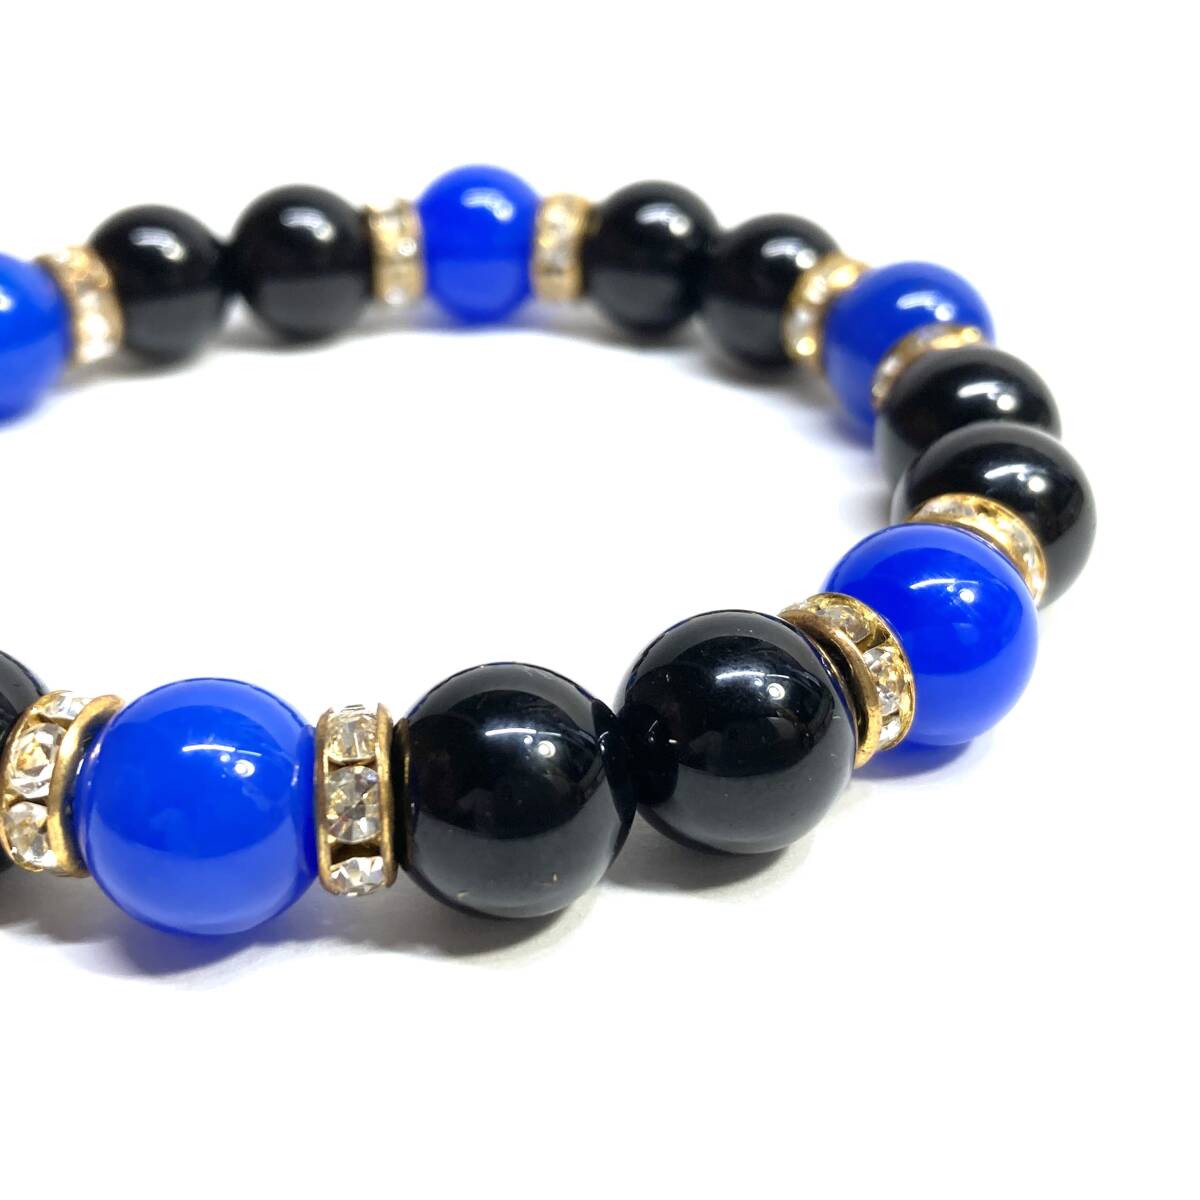 moli on & blue .. Power Stone bracele natural stone breath ( Gold ) 10mm men's * lady's . except .. a little over examination amulet 